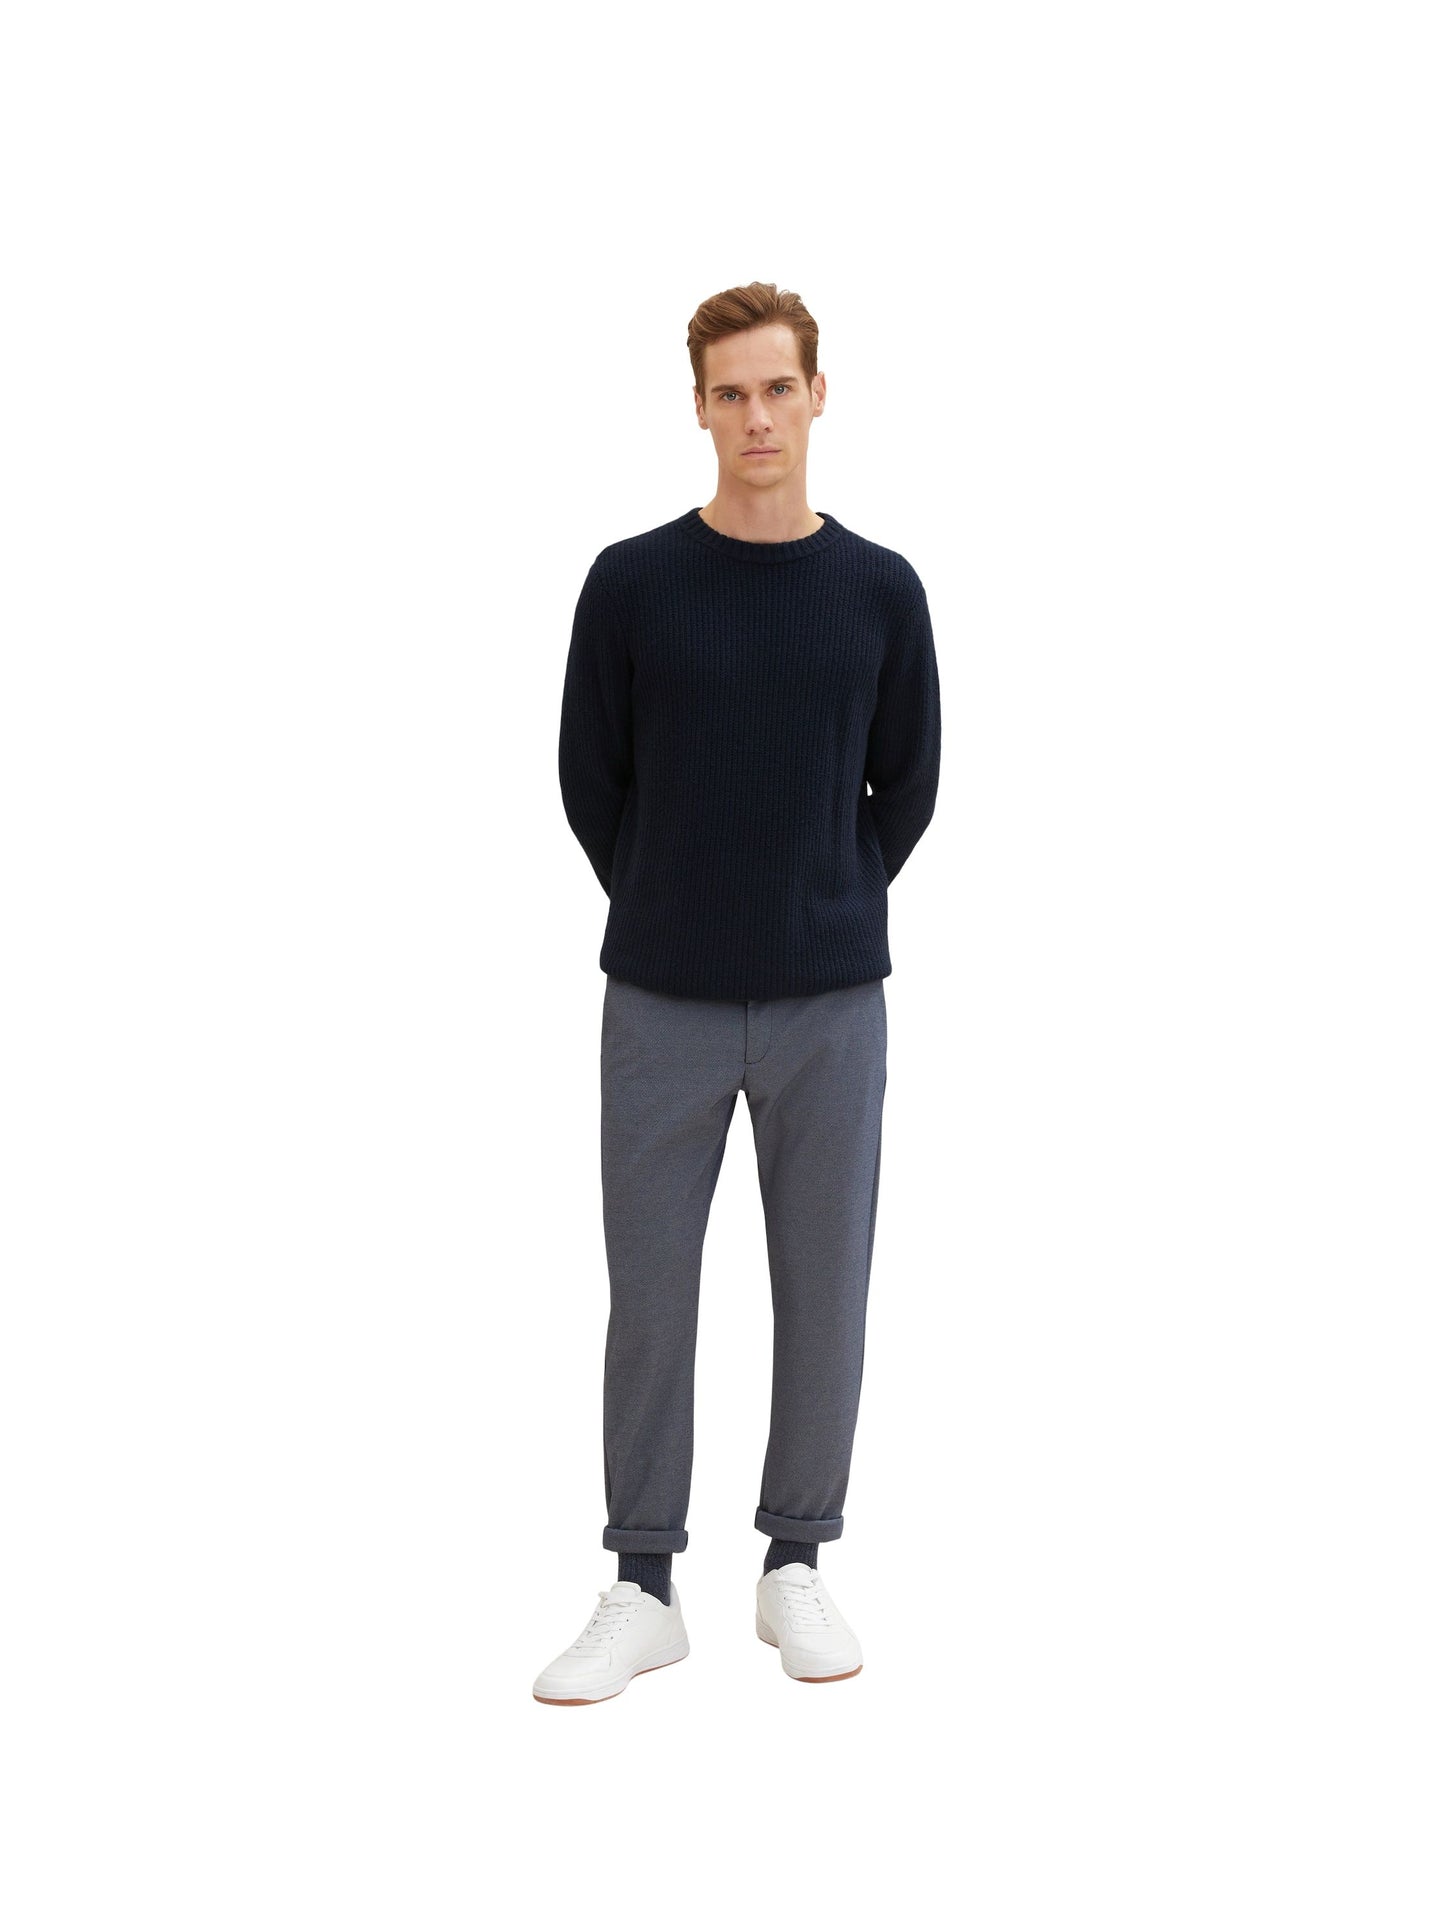 Tom Tailor tapered jersey knitted pants